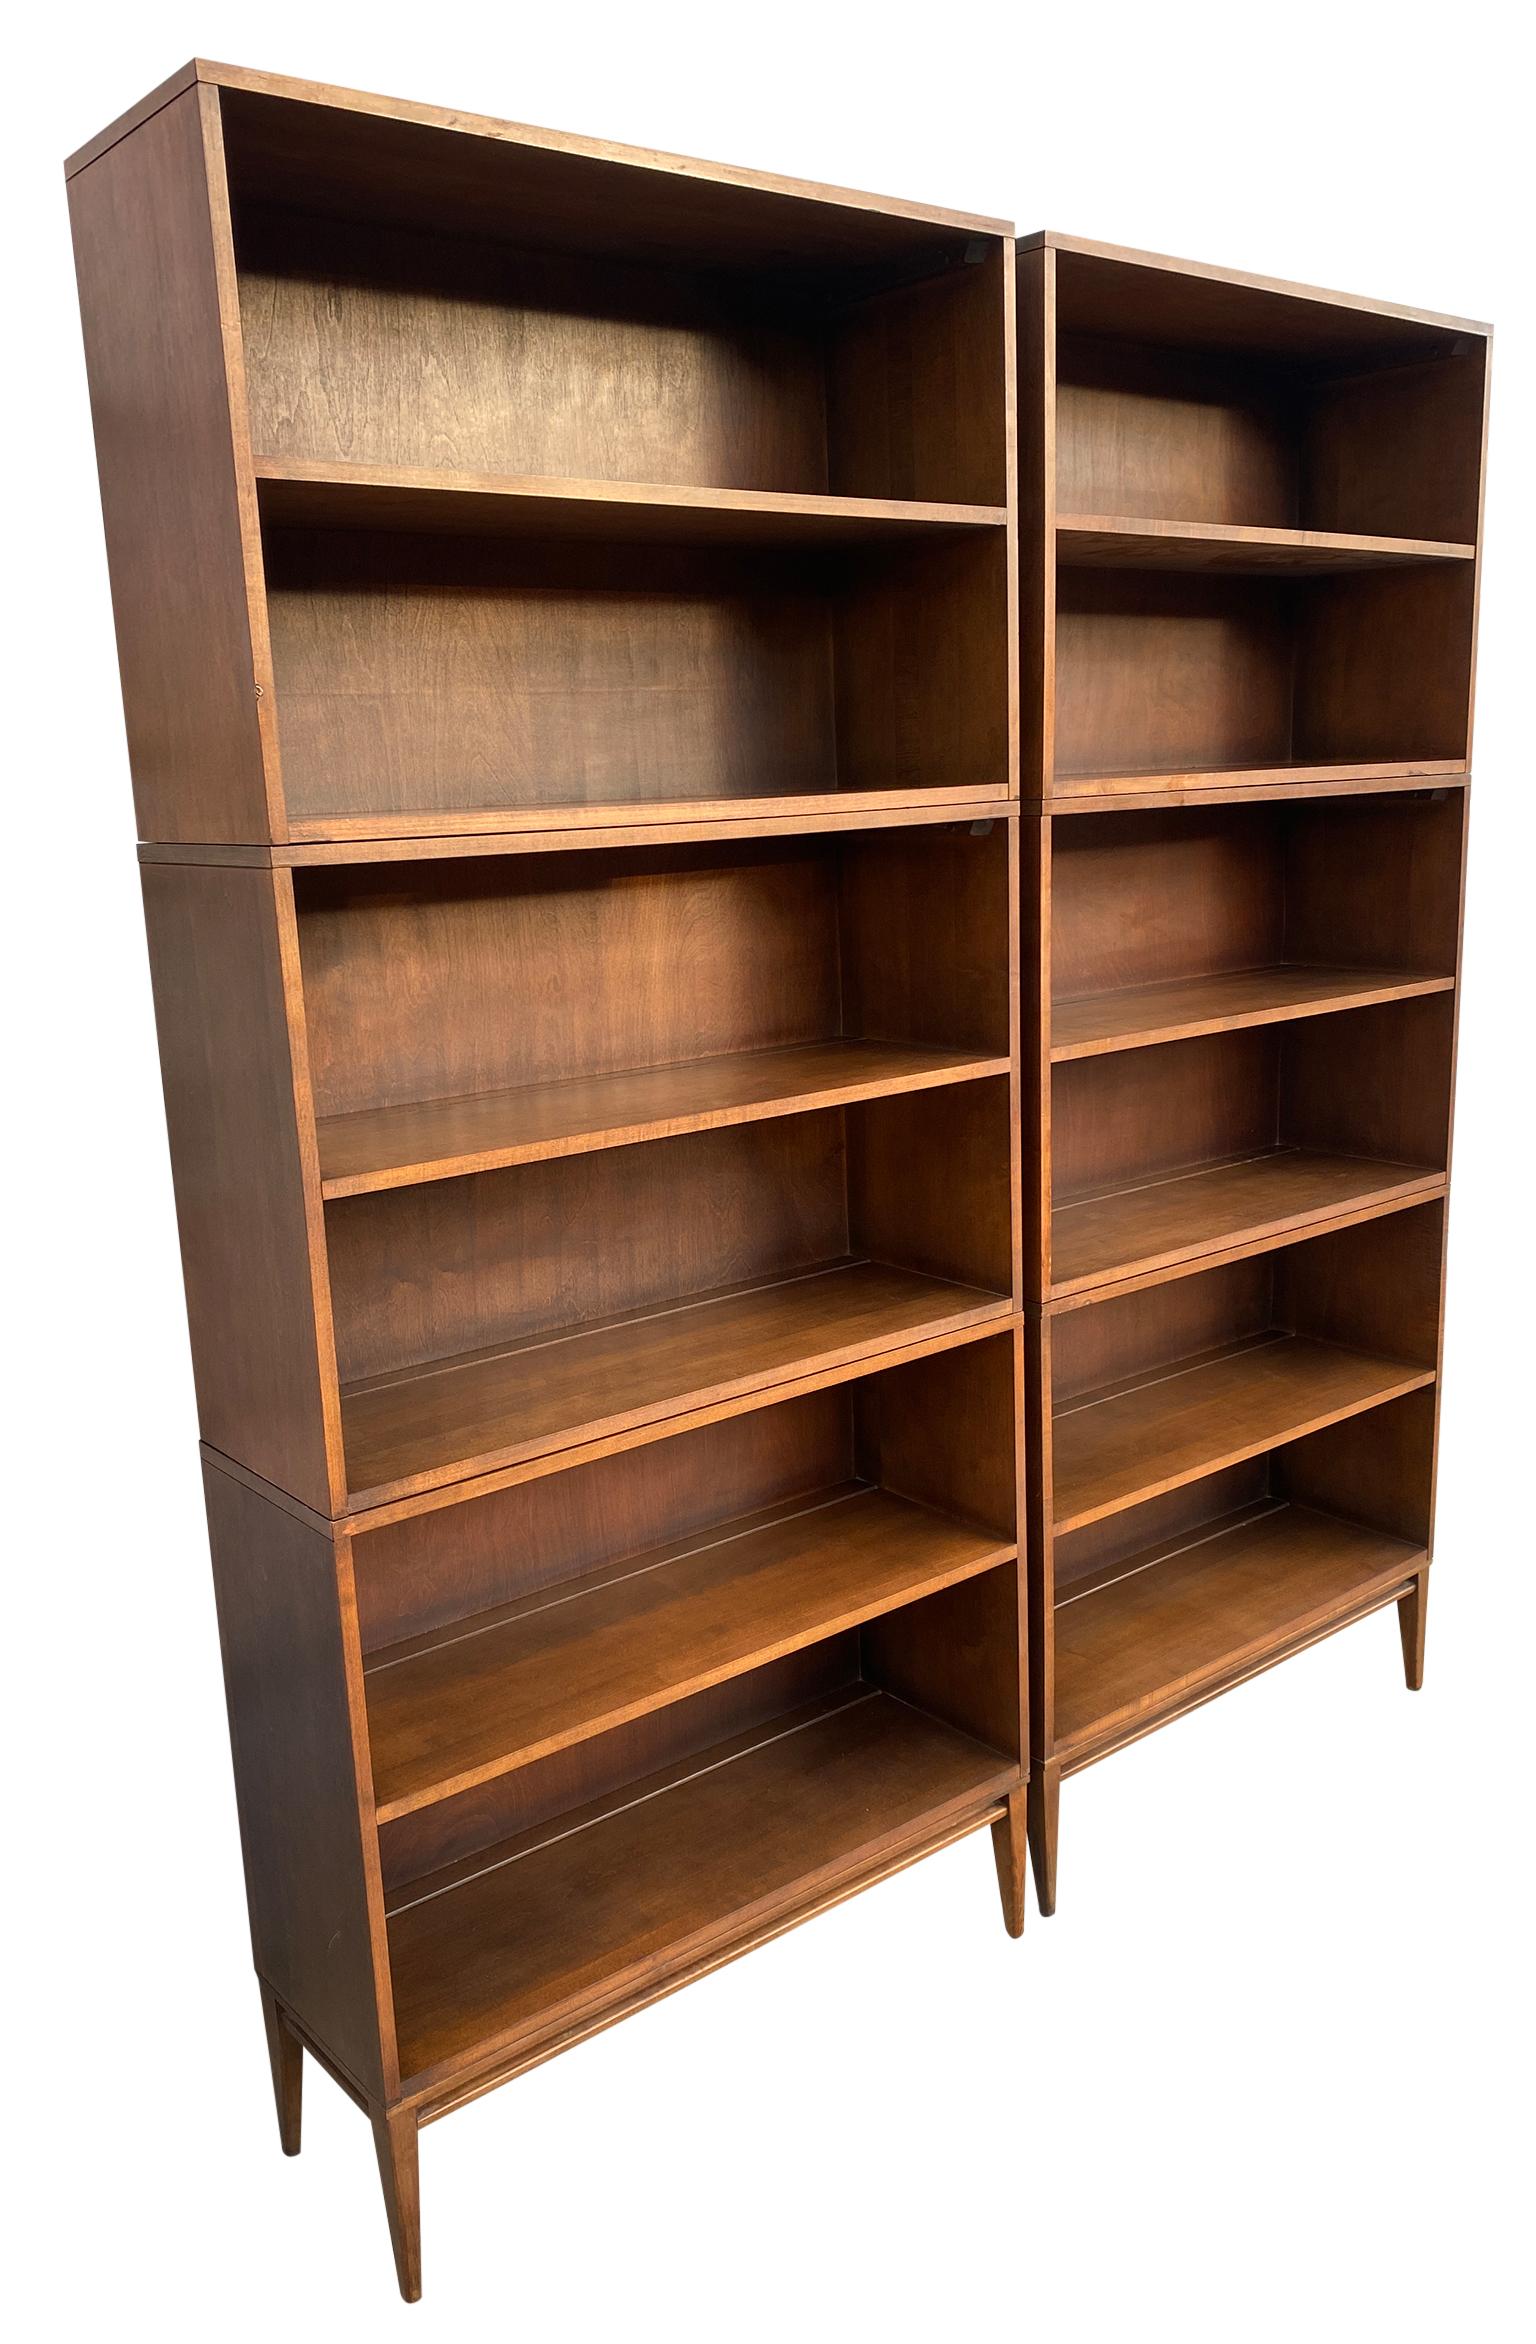 Pair of Midcentury Paul McCobb Triple Bookshelves #1516 Maple Walnut Finish In Good Condition In BROOKLYN, NY